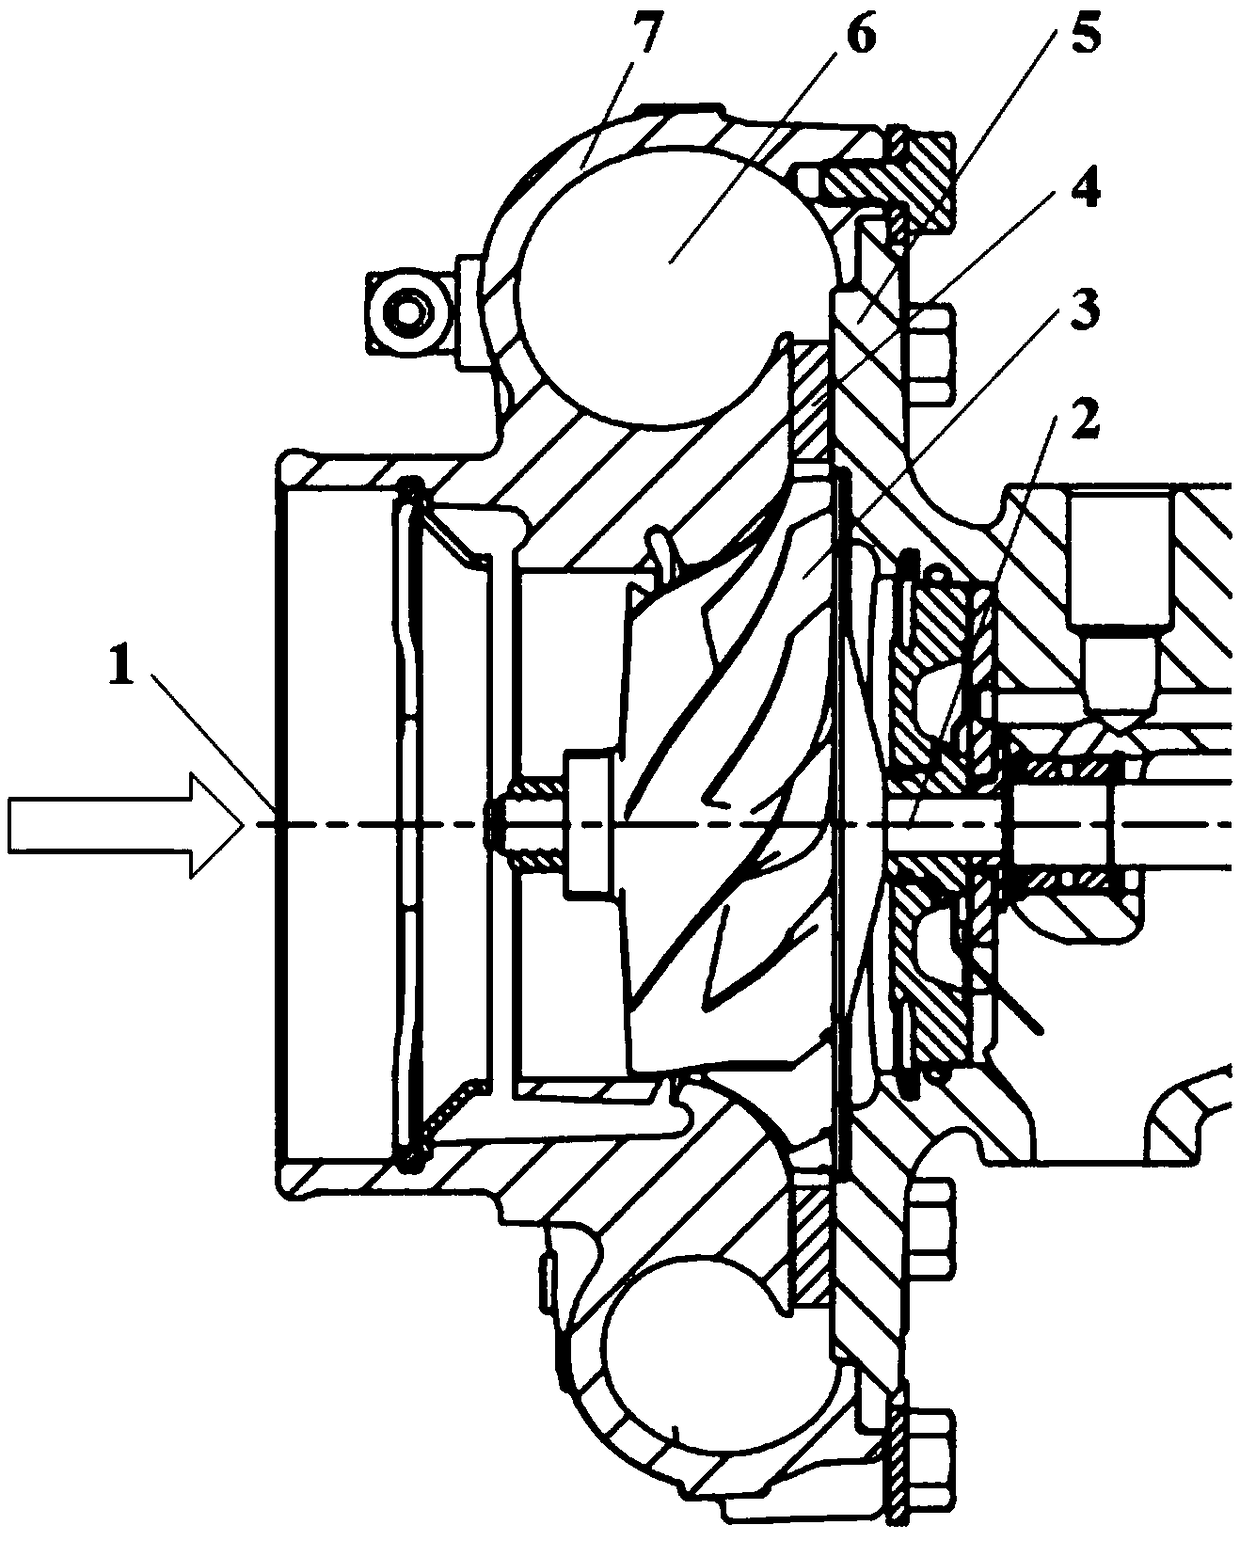 Centrifugal compressor with asymmetrical vaned diffuser with circumferentially variable vane installation angle